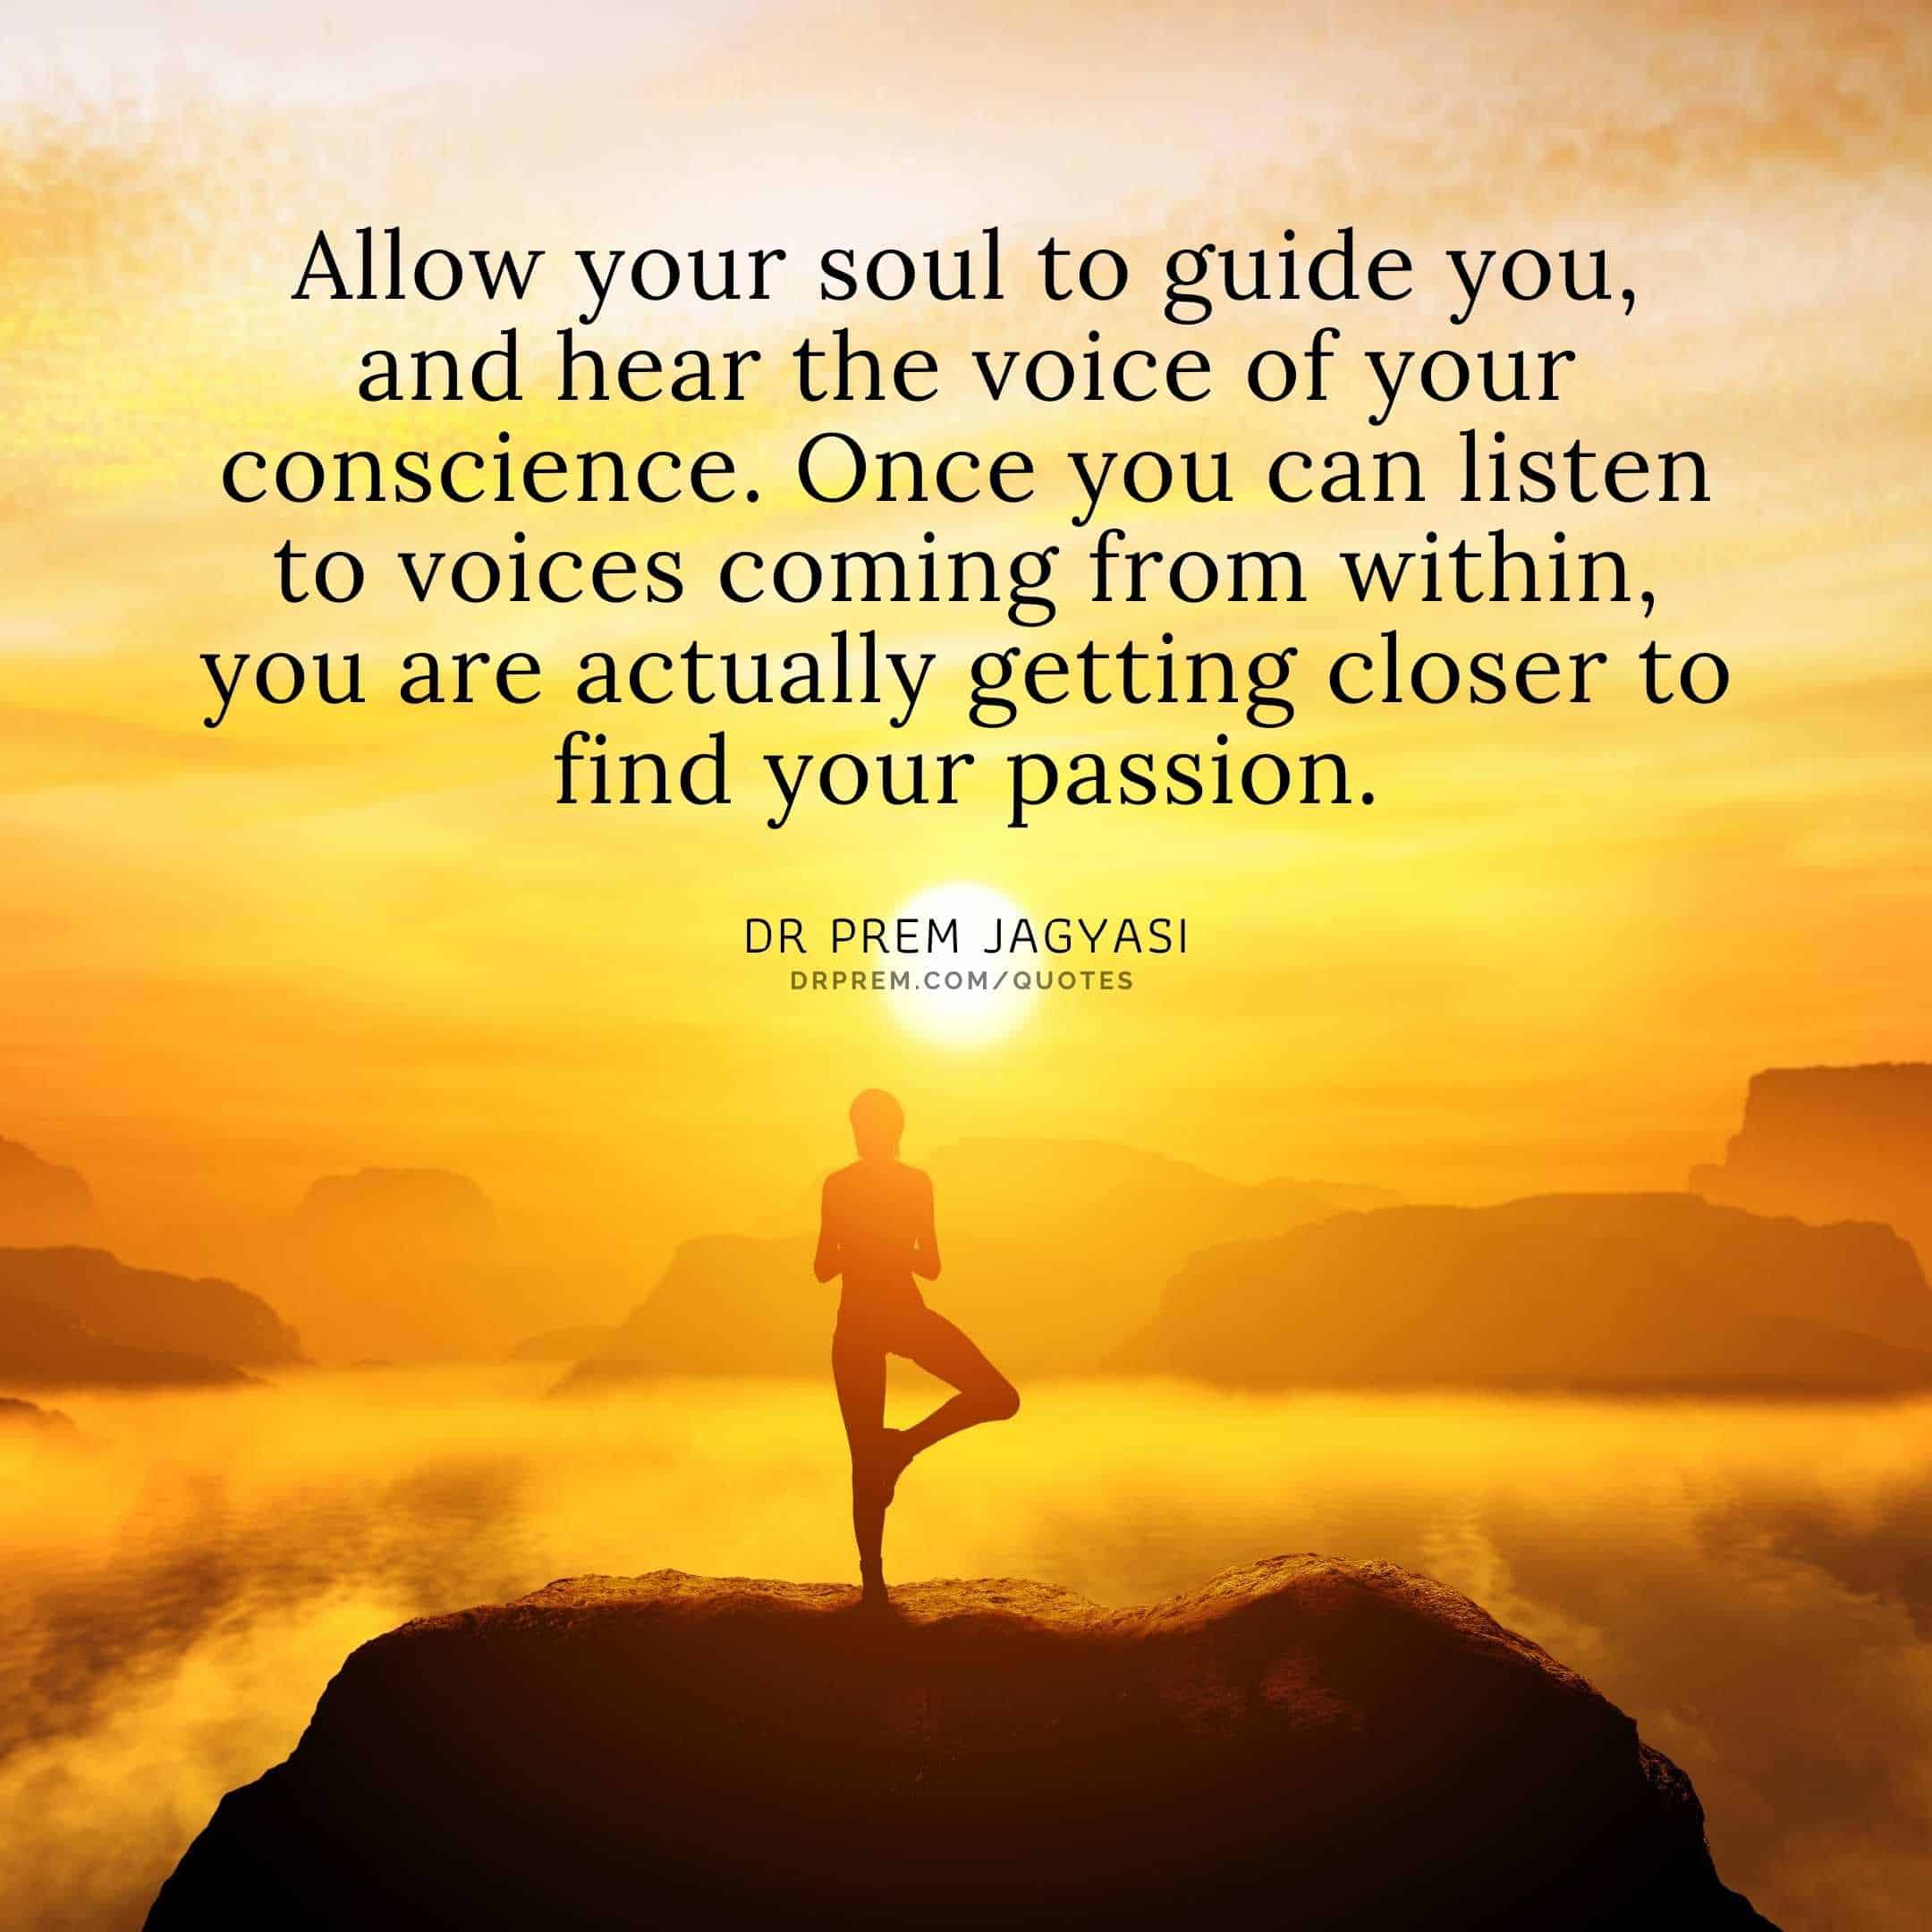 Allow your soul to guide you- Dr Prem Jagyasi Quotes